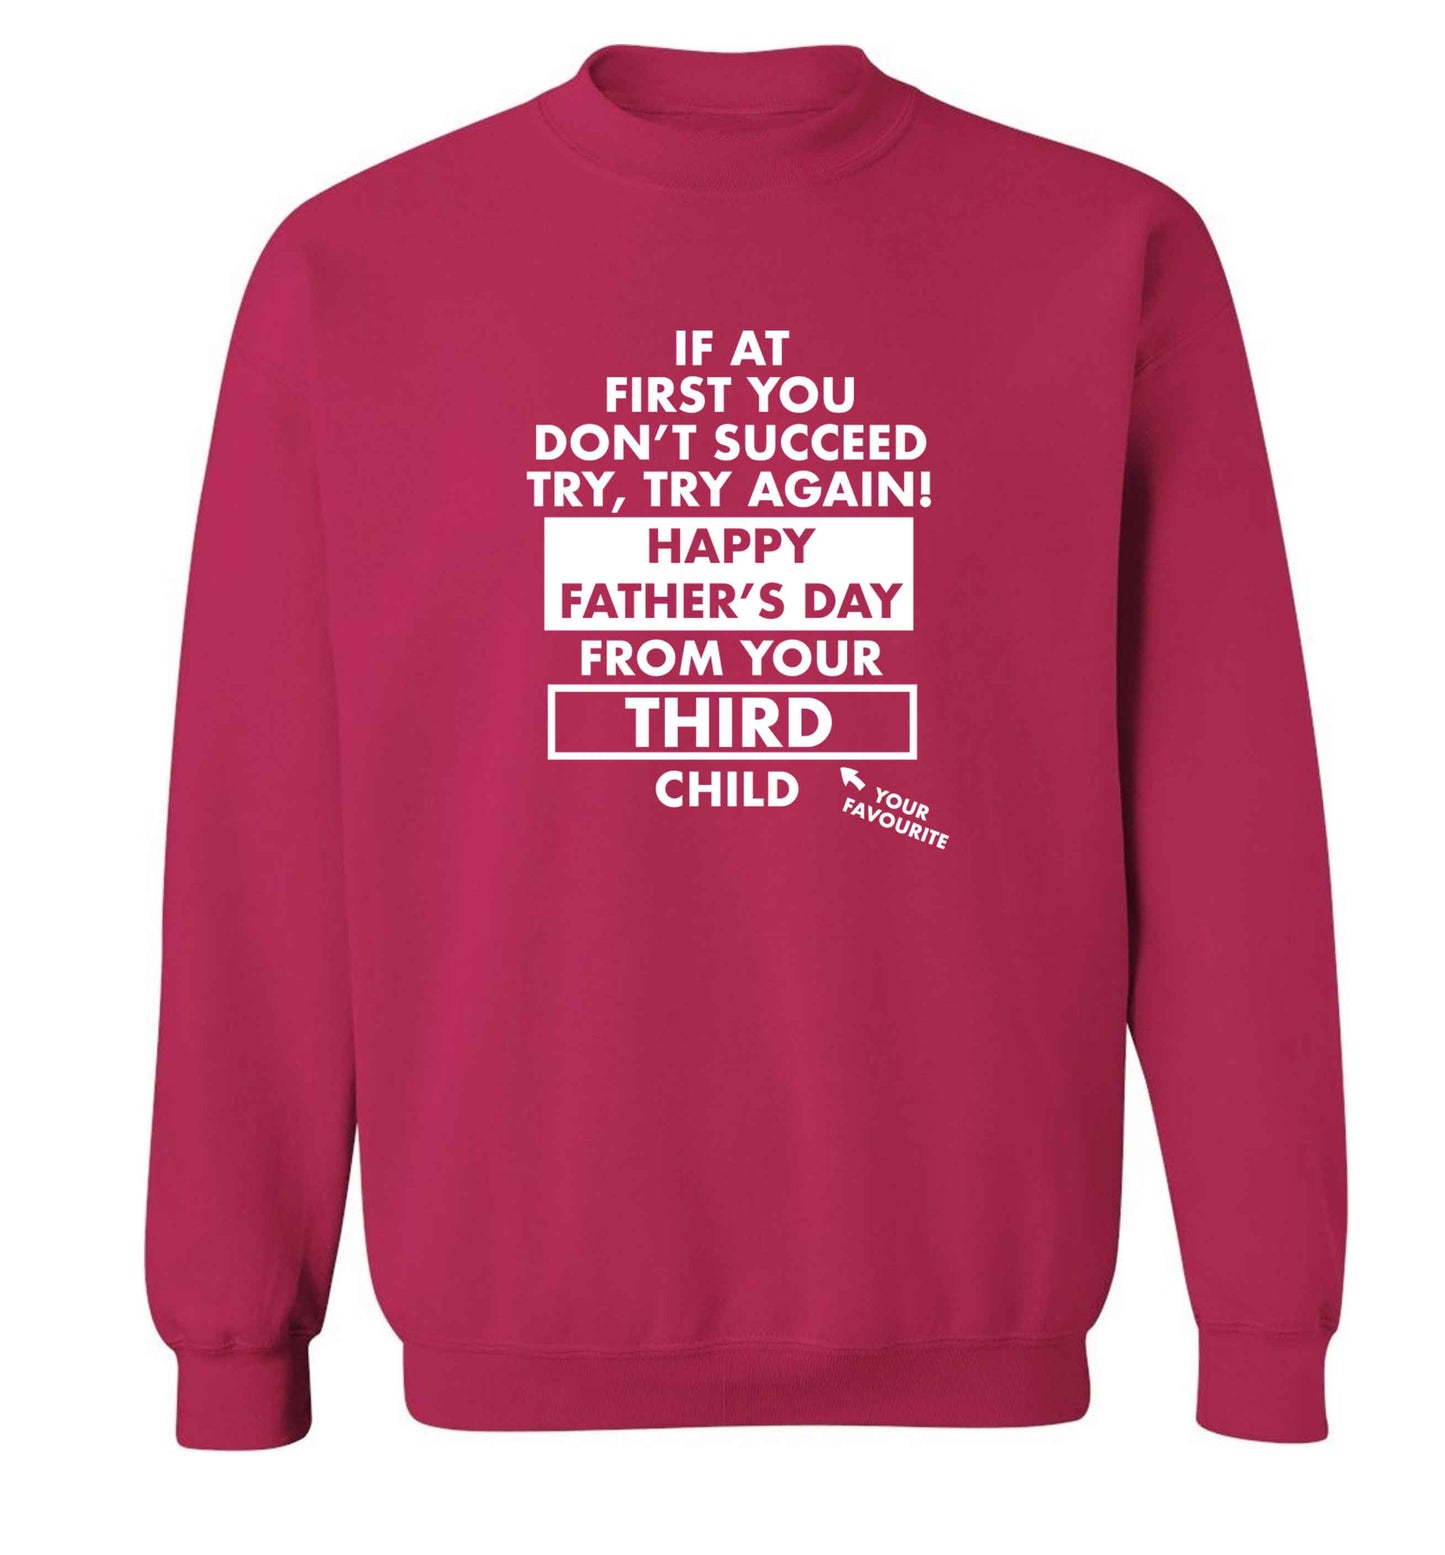 If at first you don't succeed try, try again Happy Father's day from your third child! adult's unisex pink sweater 2XL